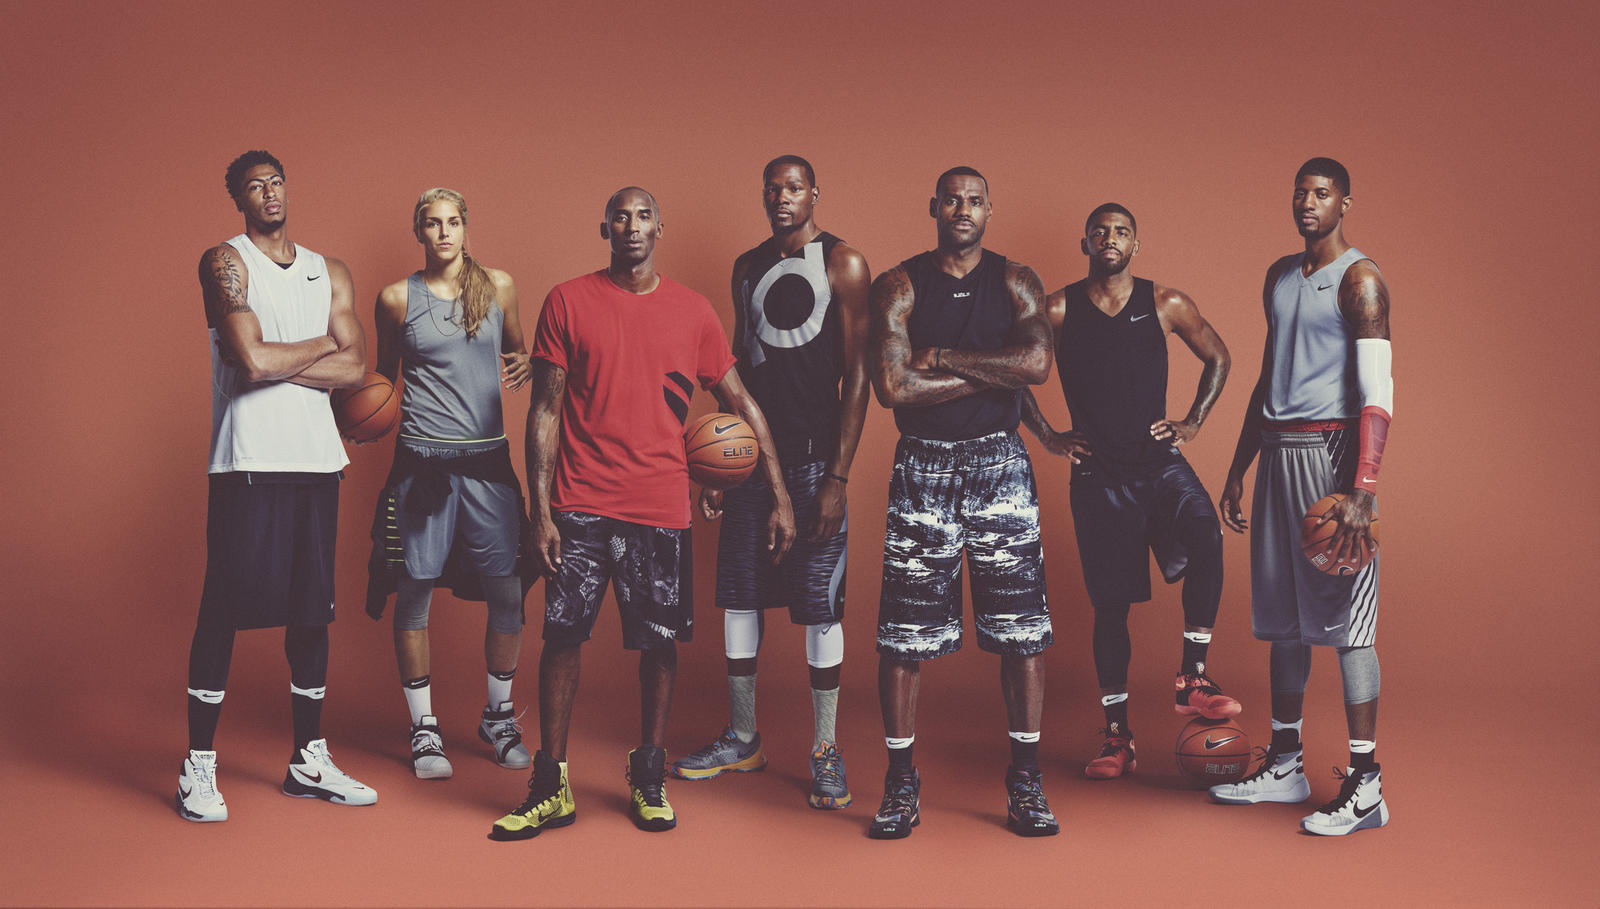 Mono veinte Abrumador All of Nike Basketball's Biggest Stars Come Together for One Epic Commercial  | Complex